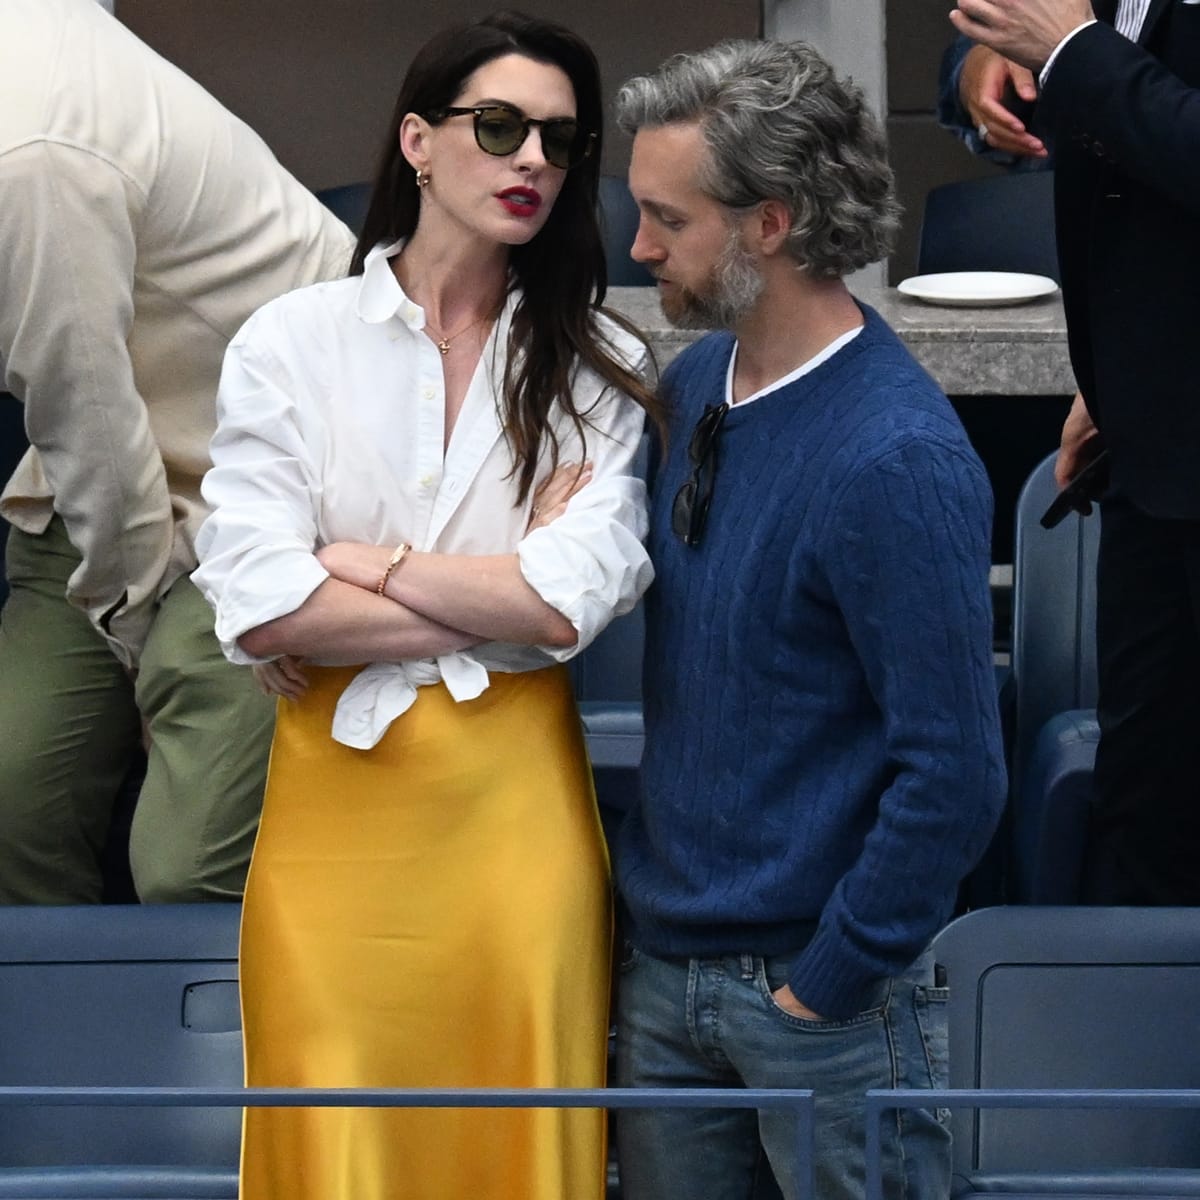 Anne Hathaway and Adam Shulman attend the men's final on day 14 of the US Open 2022, the 4th Grand Slam of the season, at the USTA Billie Jean King National Tennis Center